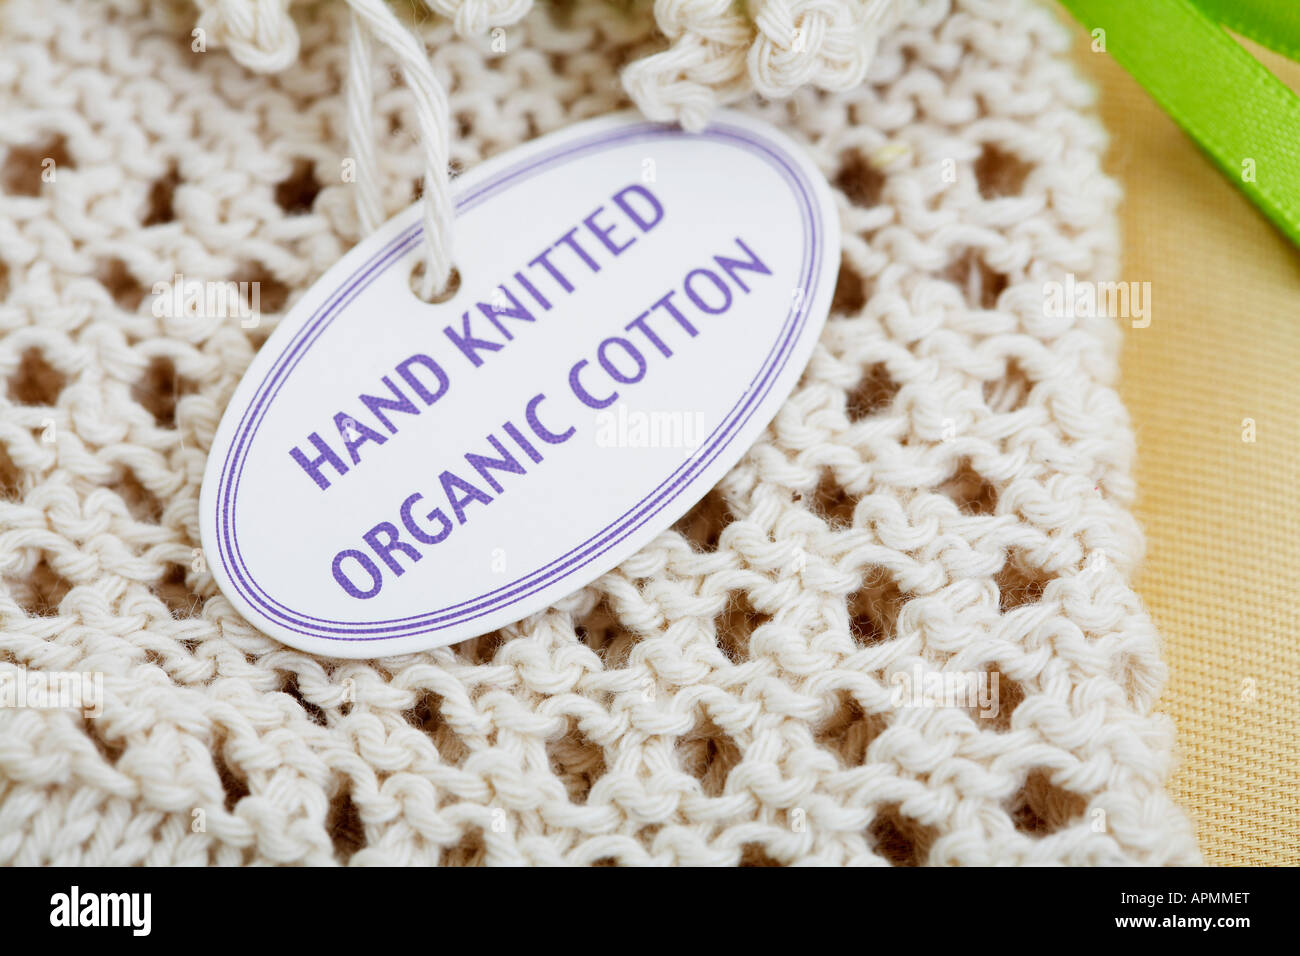 Label on knitted product (close-up) Stock Photo